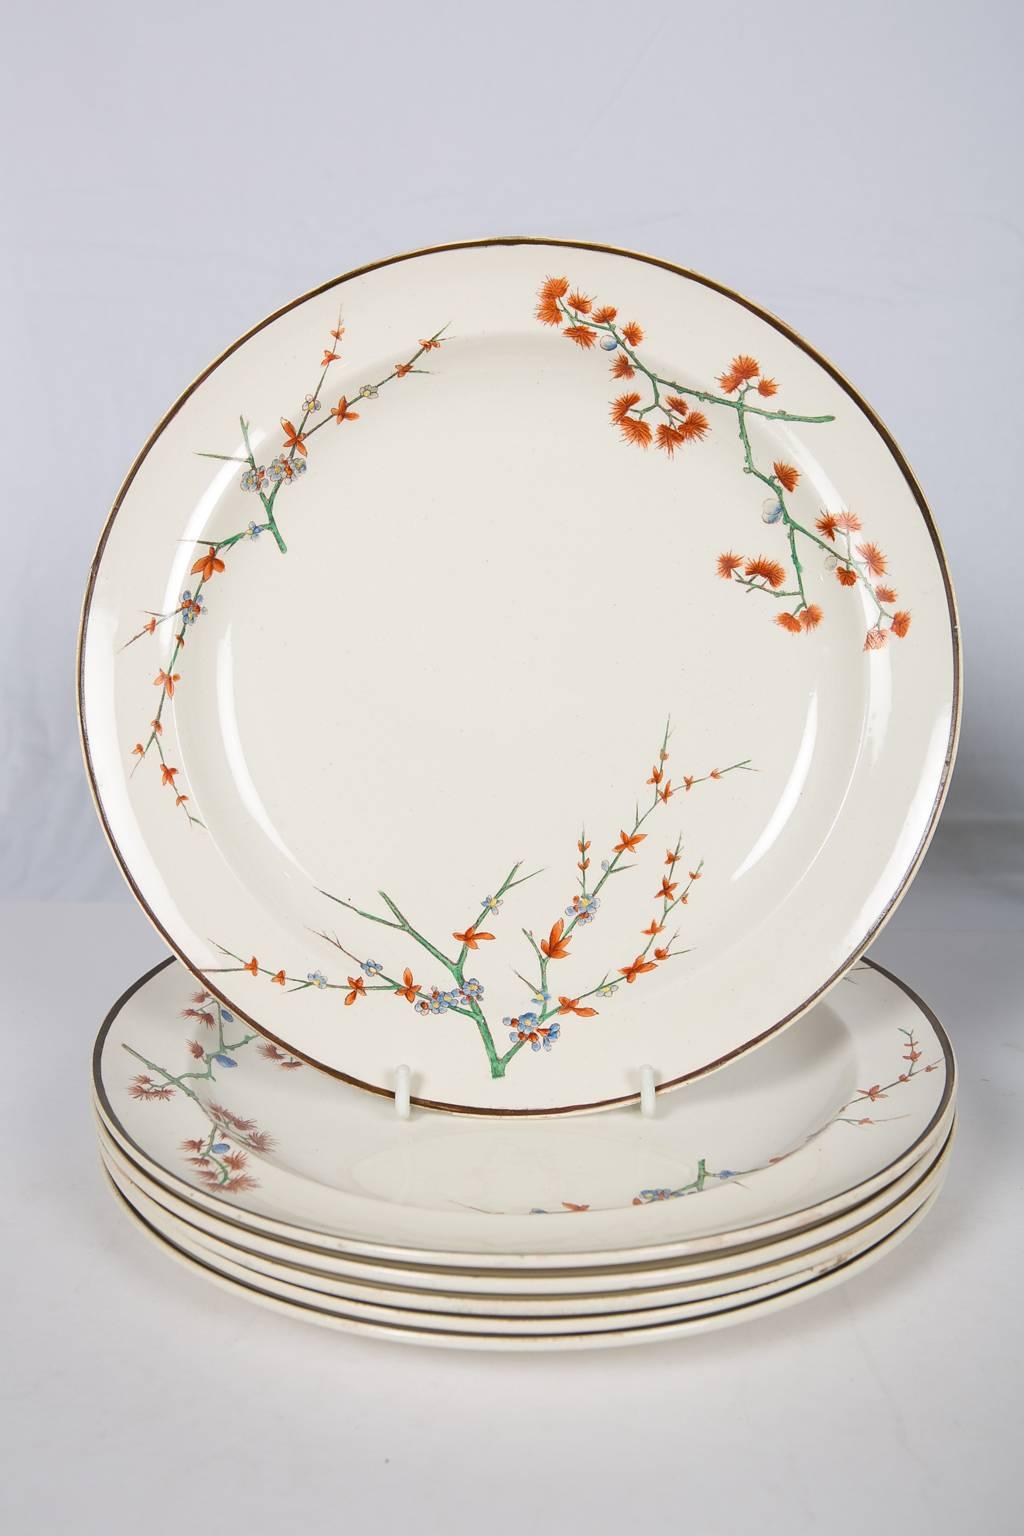 26 Wedgwood Creamware Dinner Plates with Thistle Design Made, circa 1880 For Sale 2